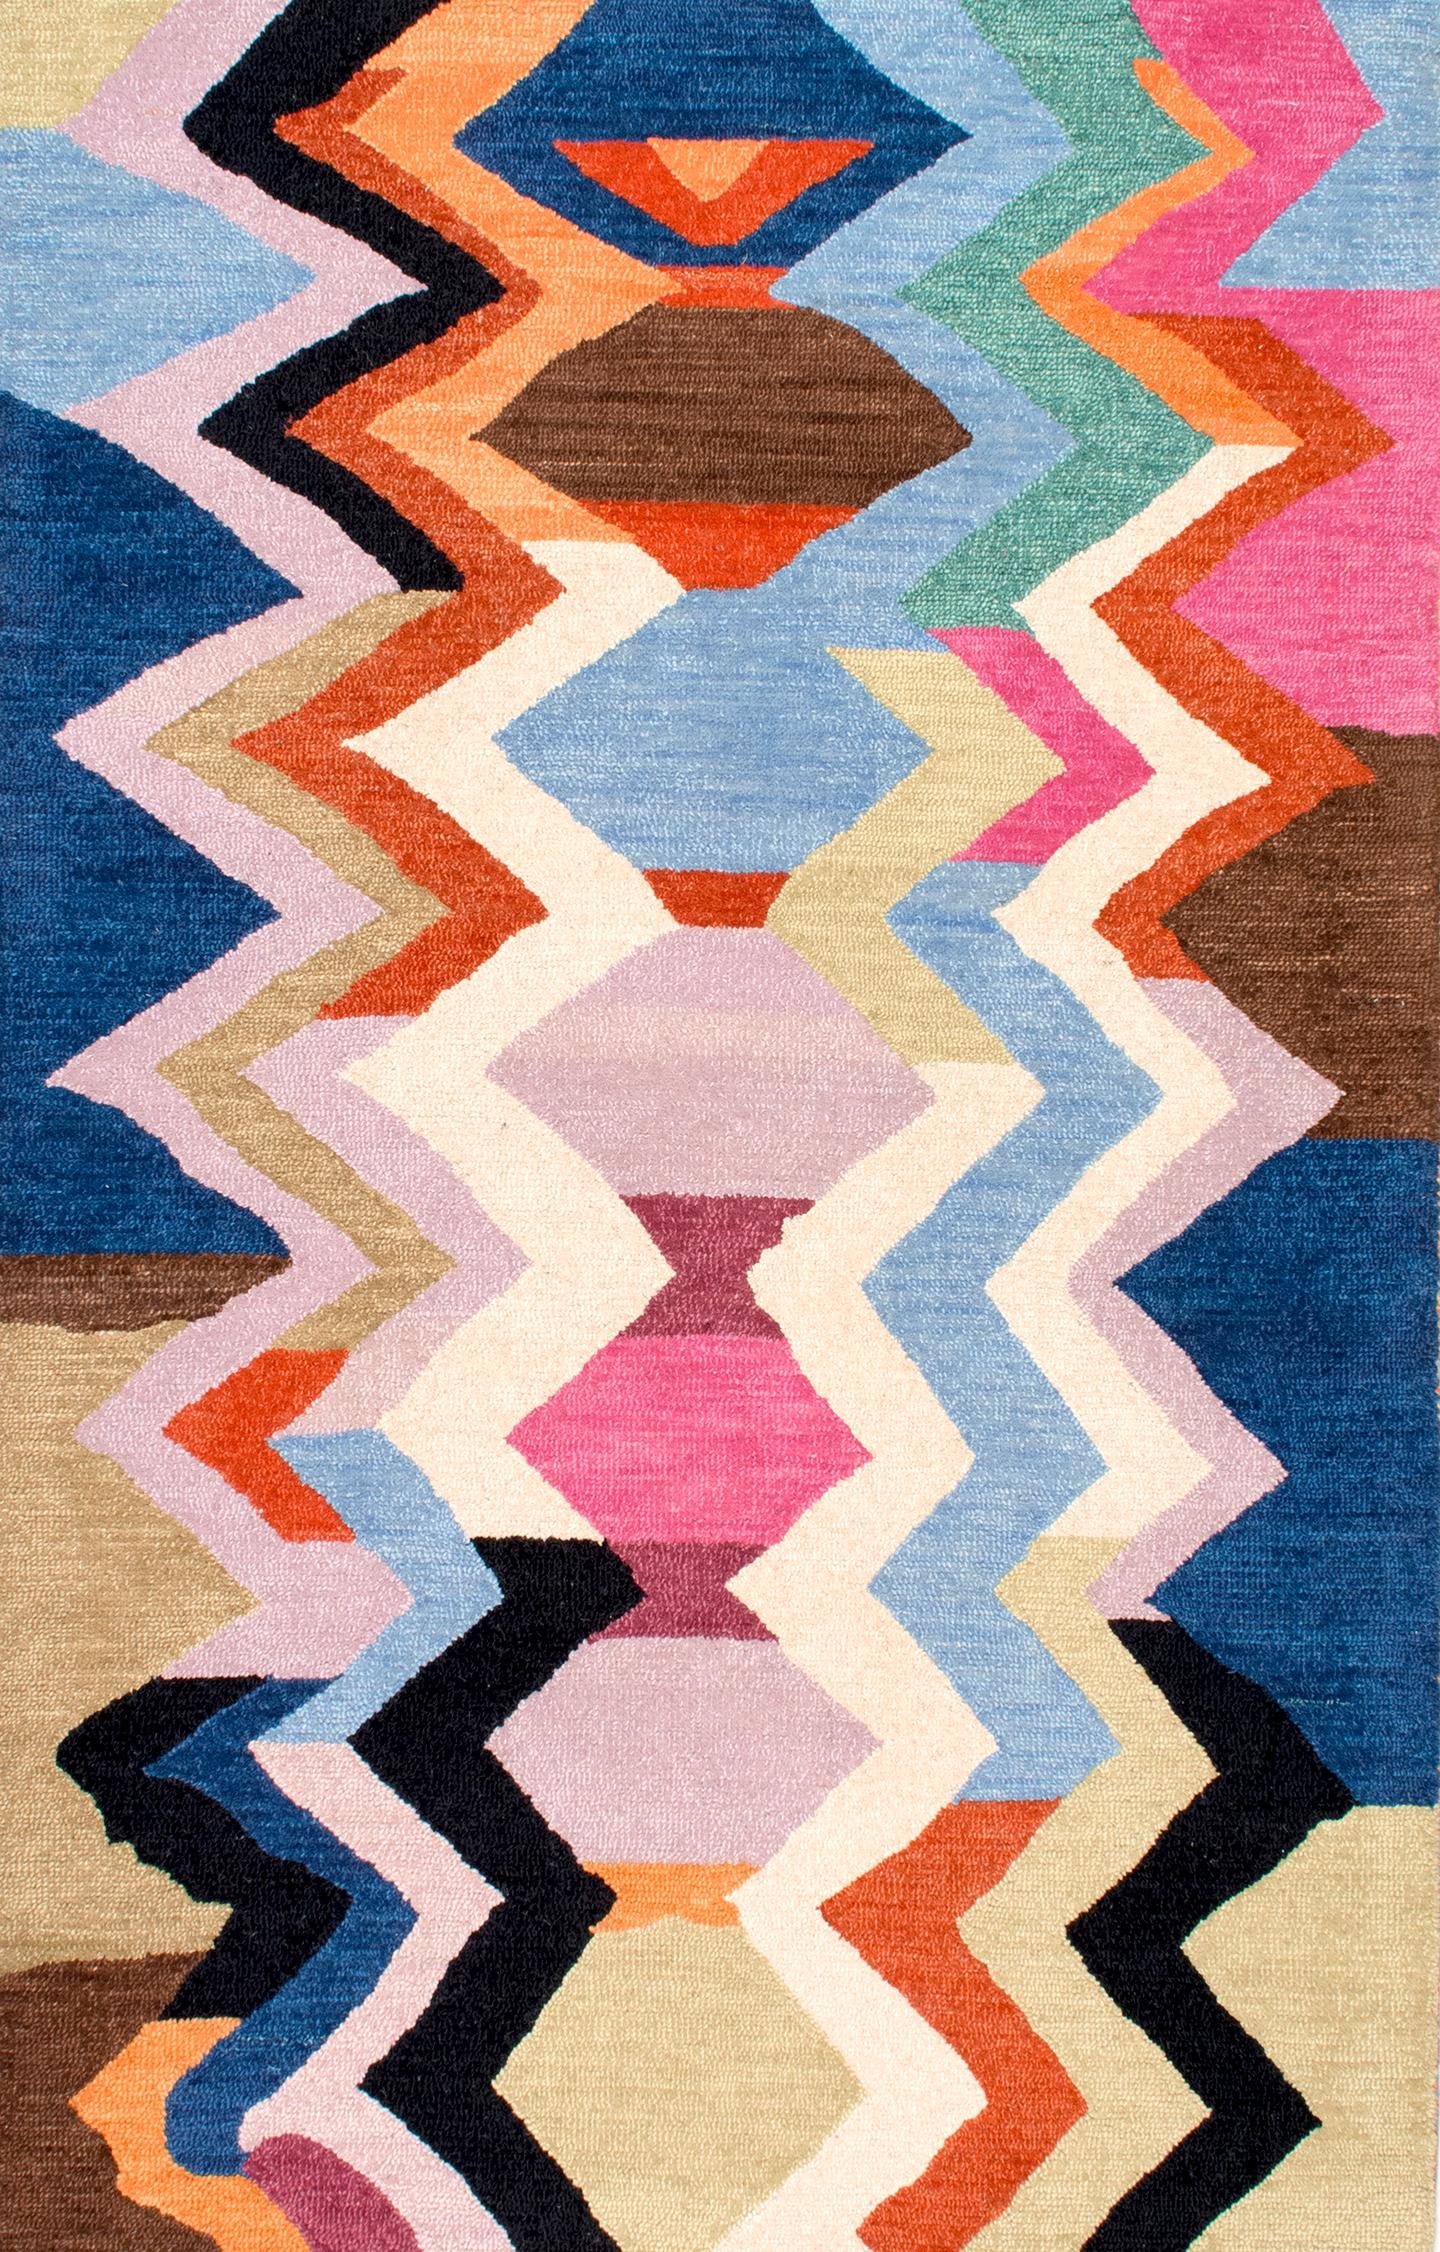 Hand Tufted Aguirre Area Rug - Image 1